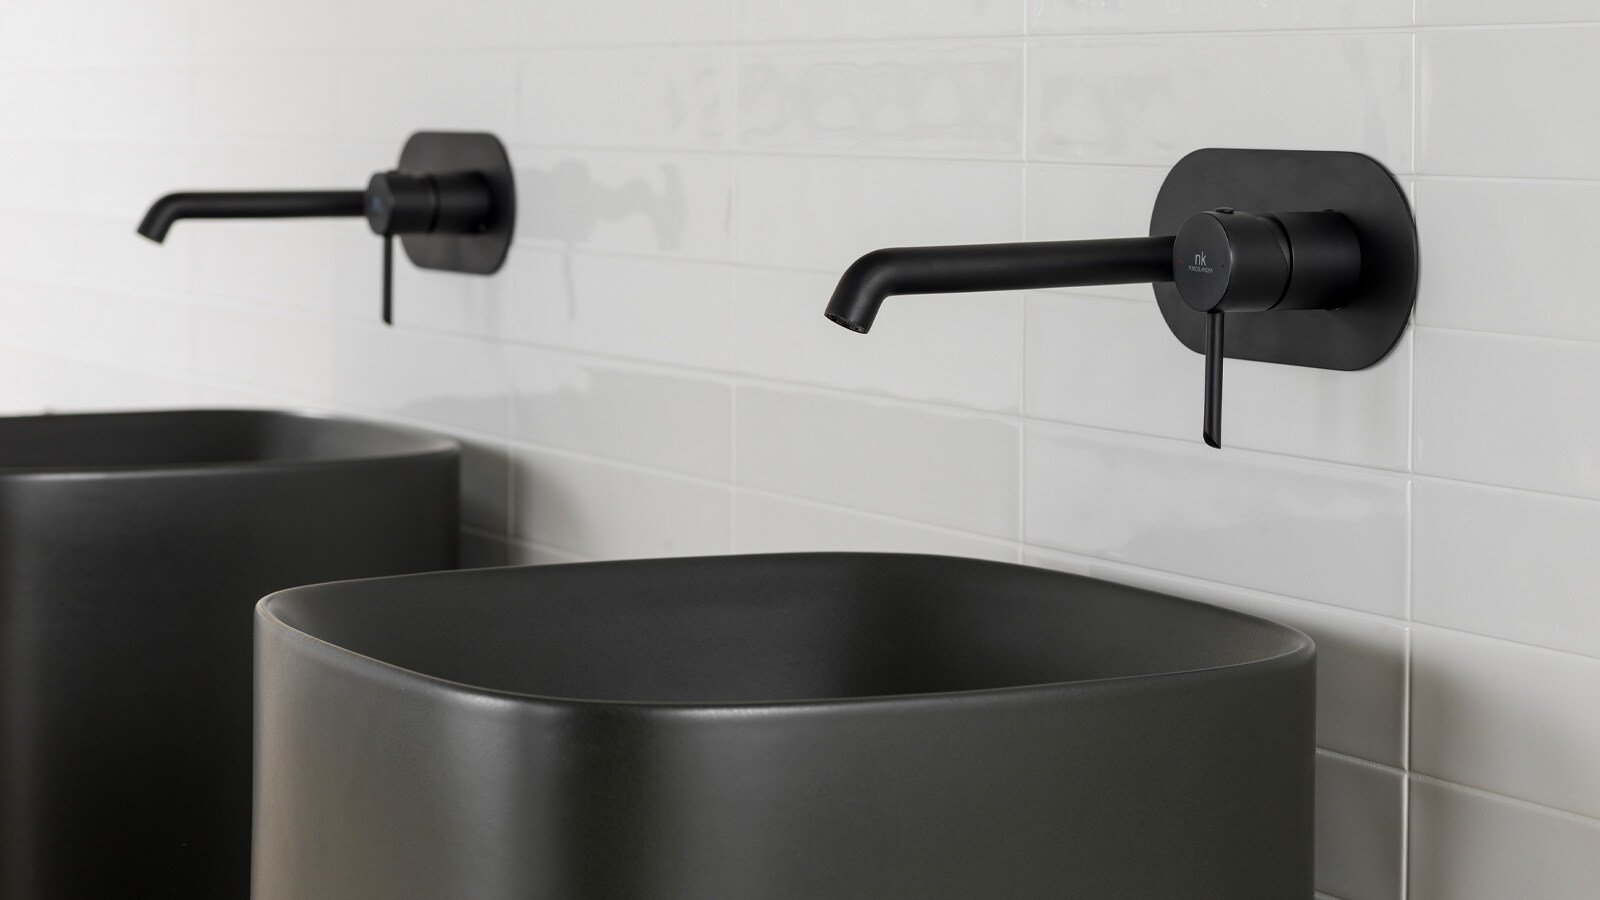 Noken's black taps for bathrooms with personality